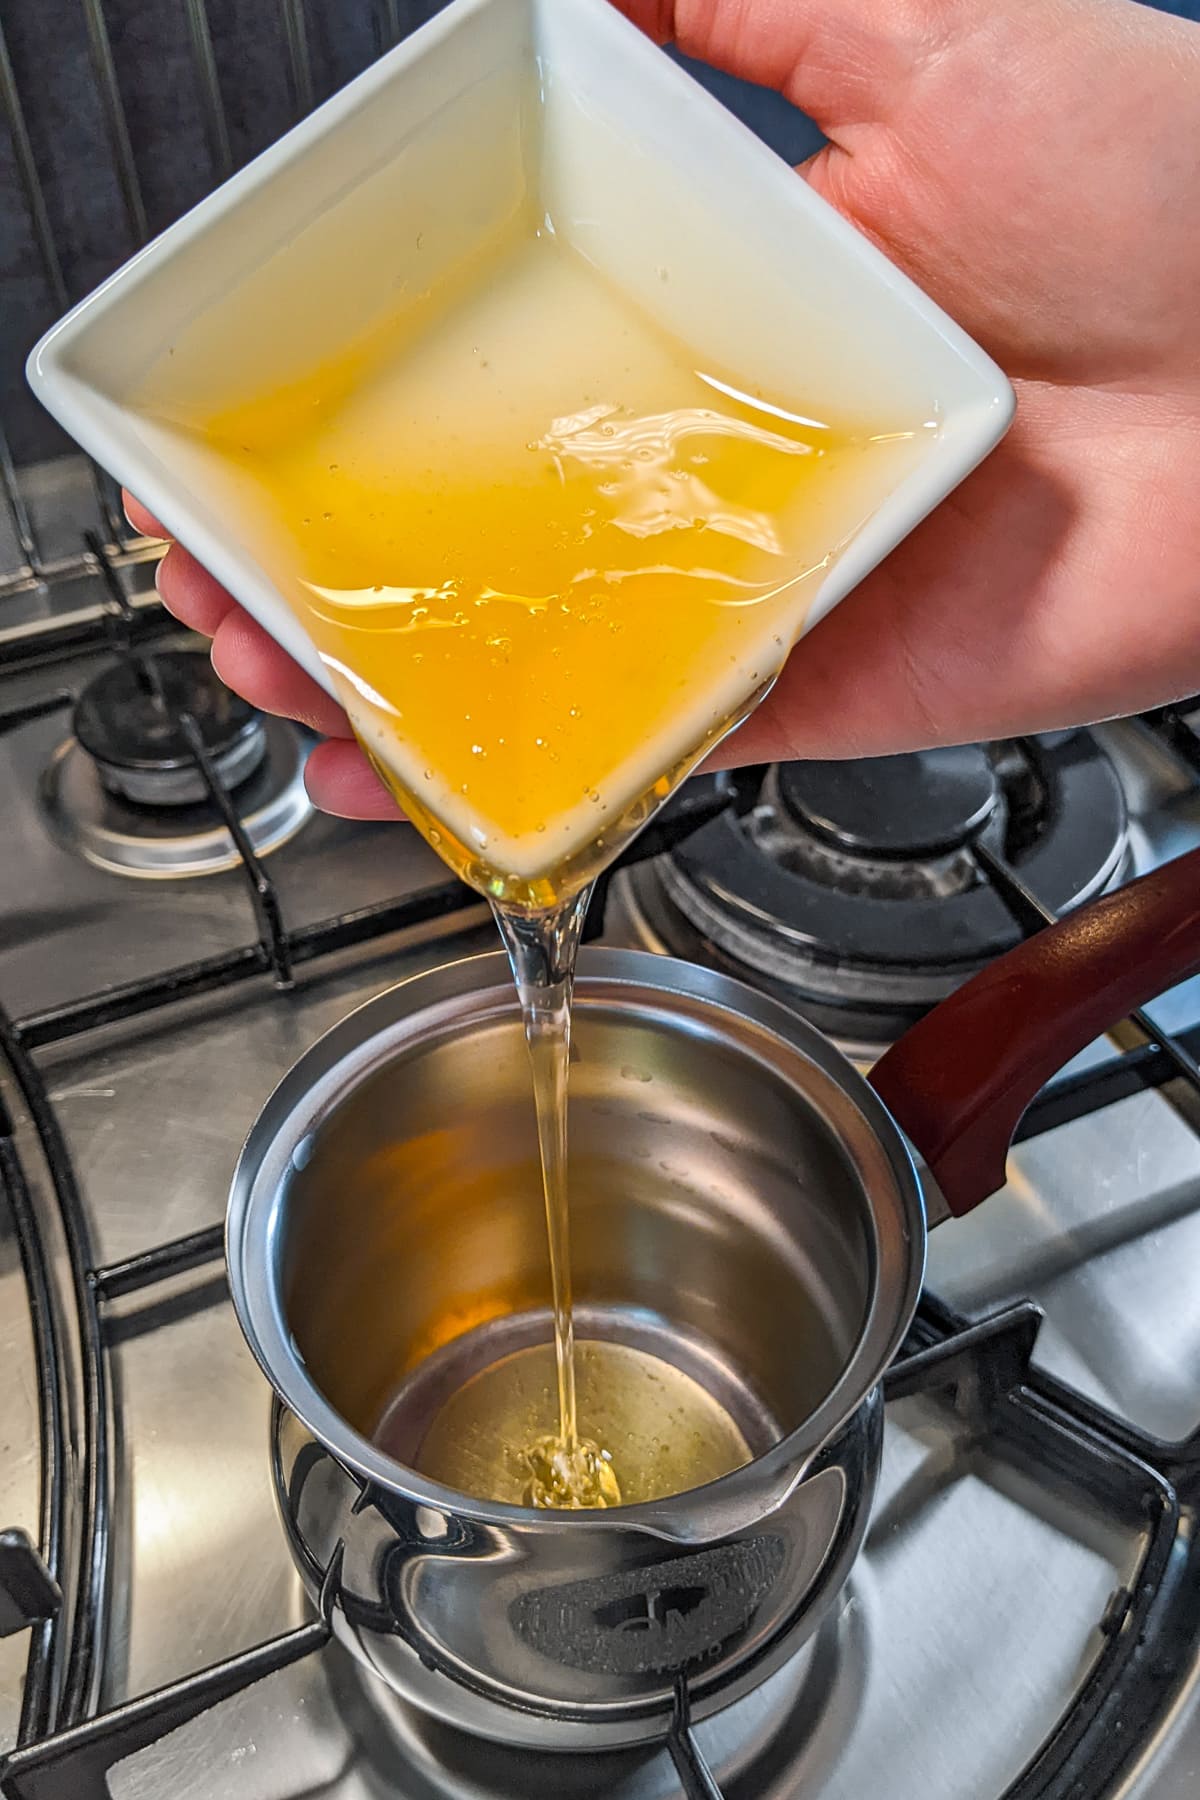 Pouring honey in a small sauce pan on the stove.